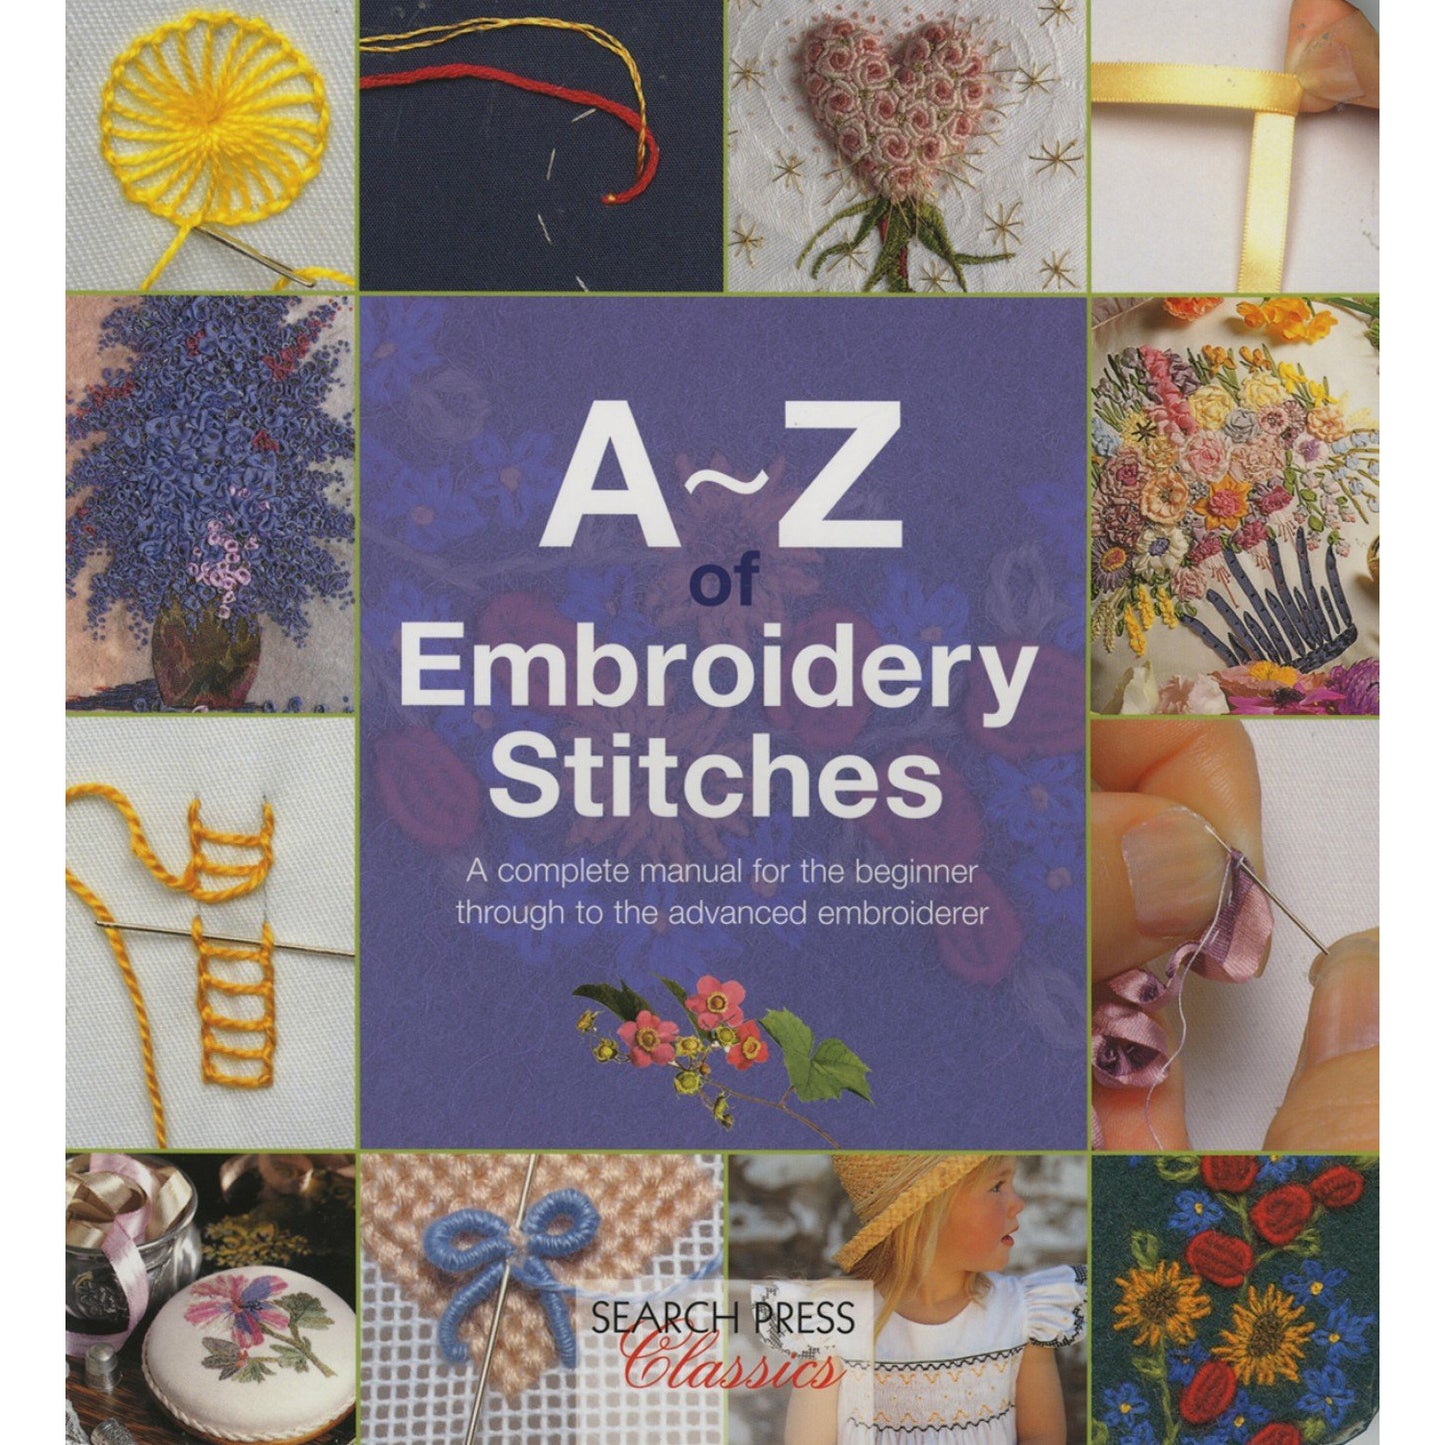 A-Z of Embroidery Stitches – Hobby House Needleworks